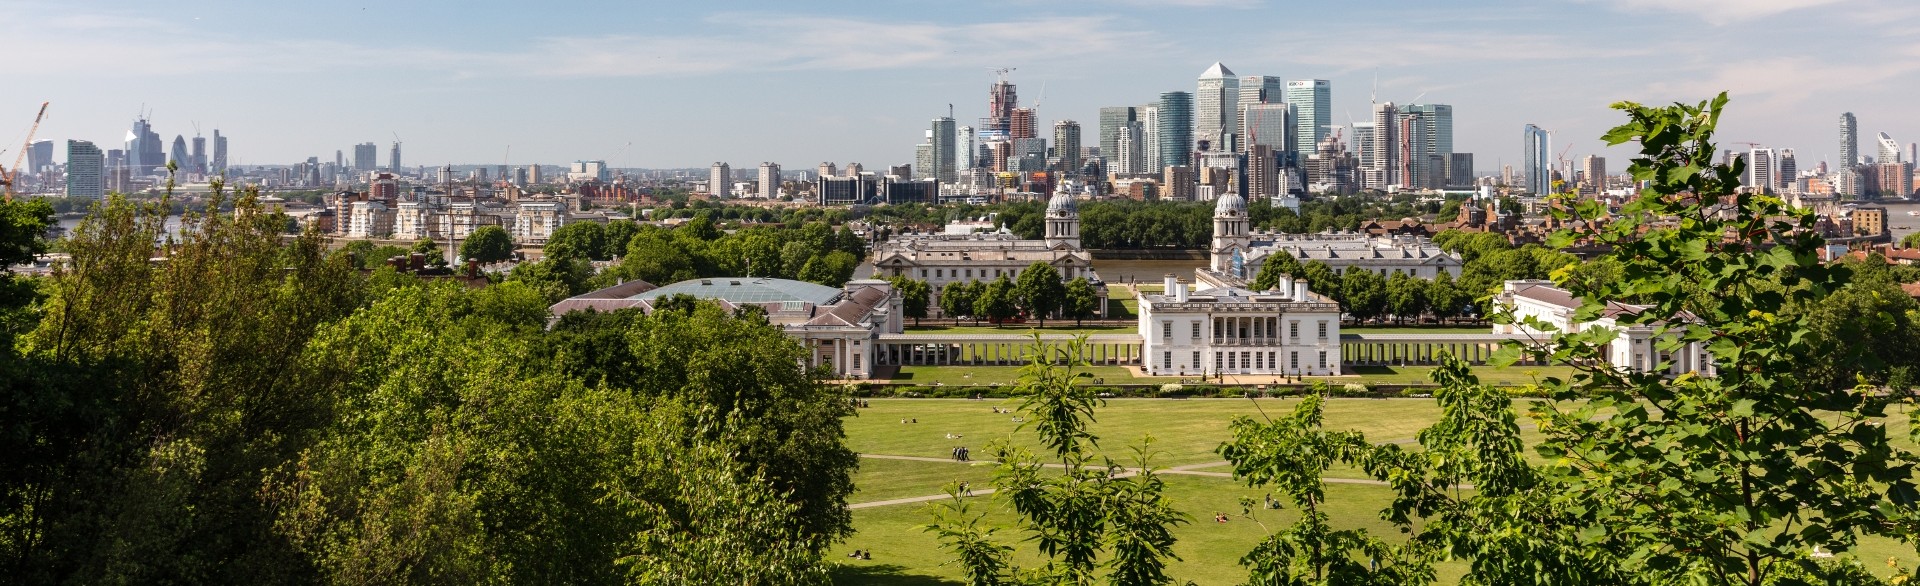 View of Greenwich Park on sunny day.